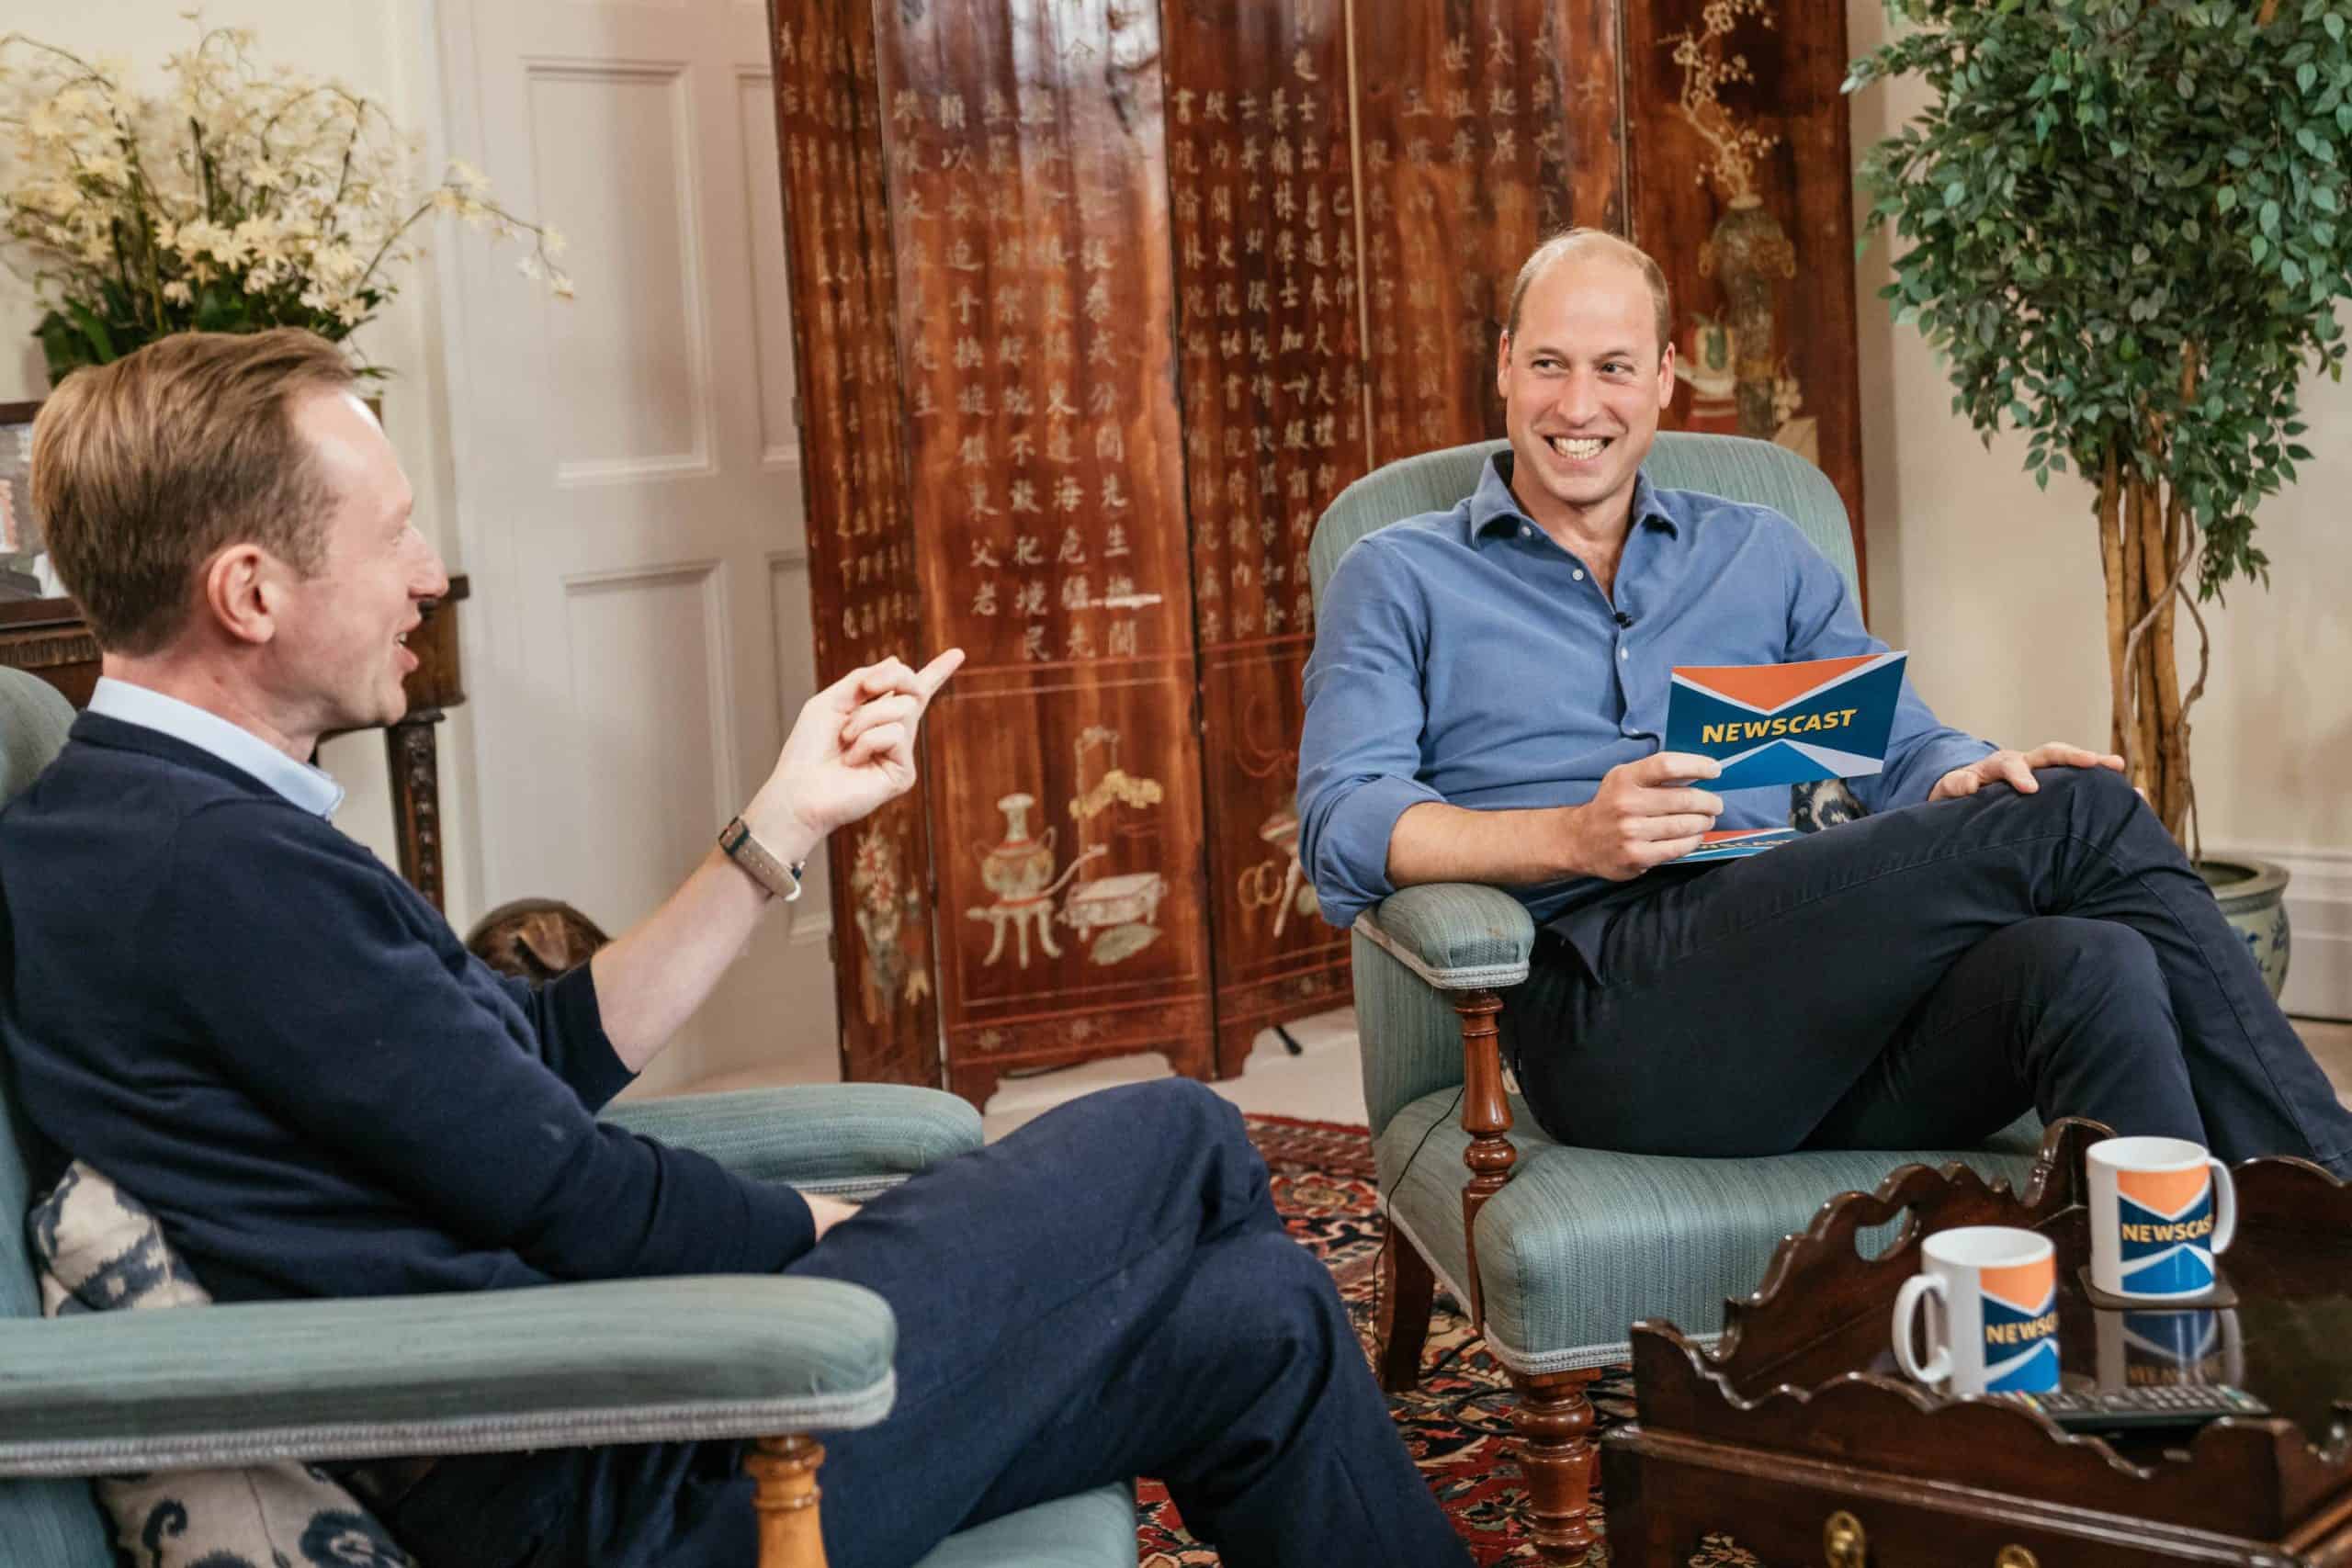 Prince William aims rocket at Bezos over billionaire space race